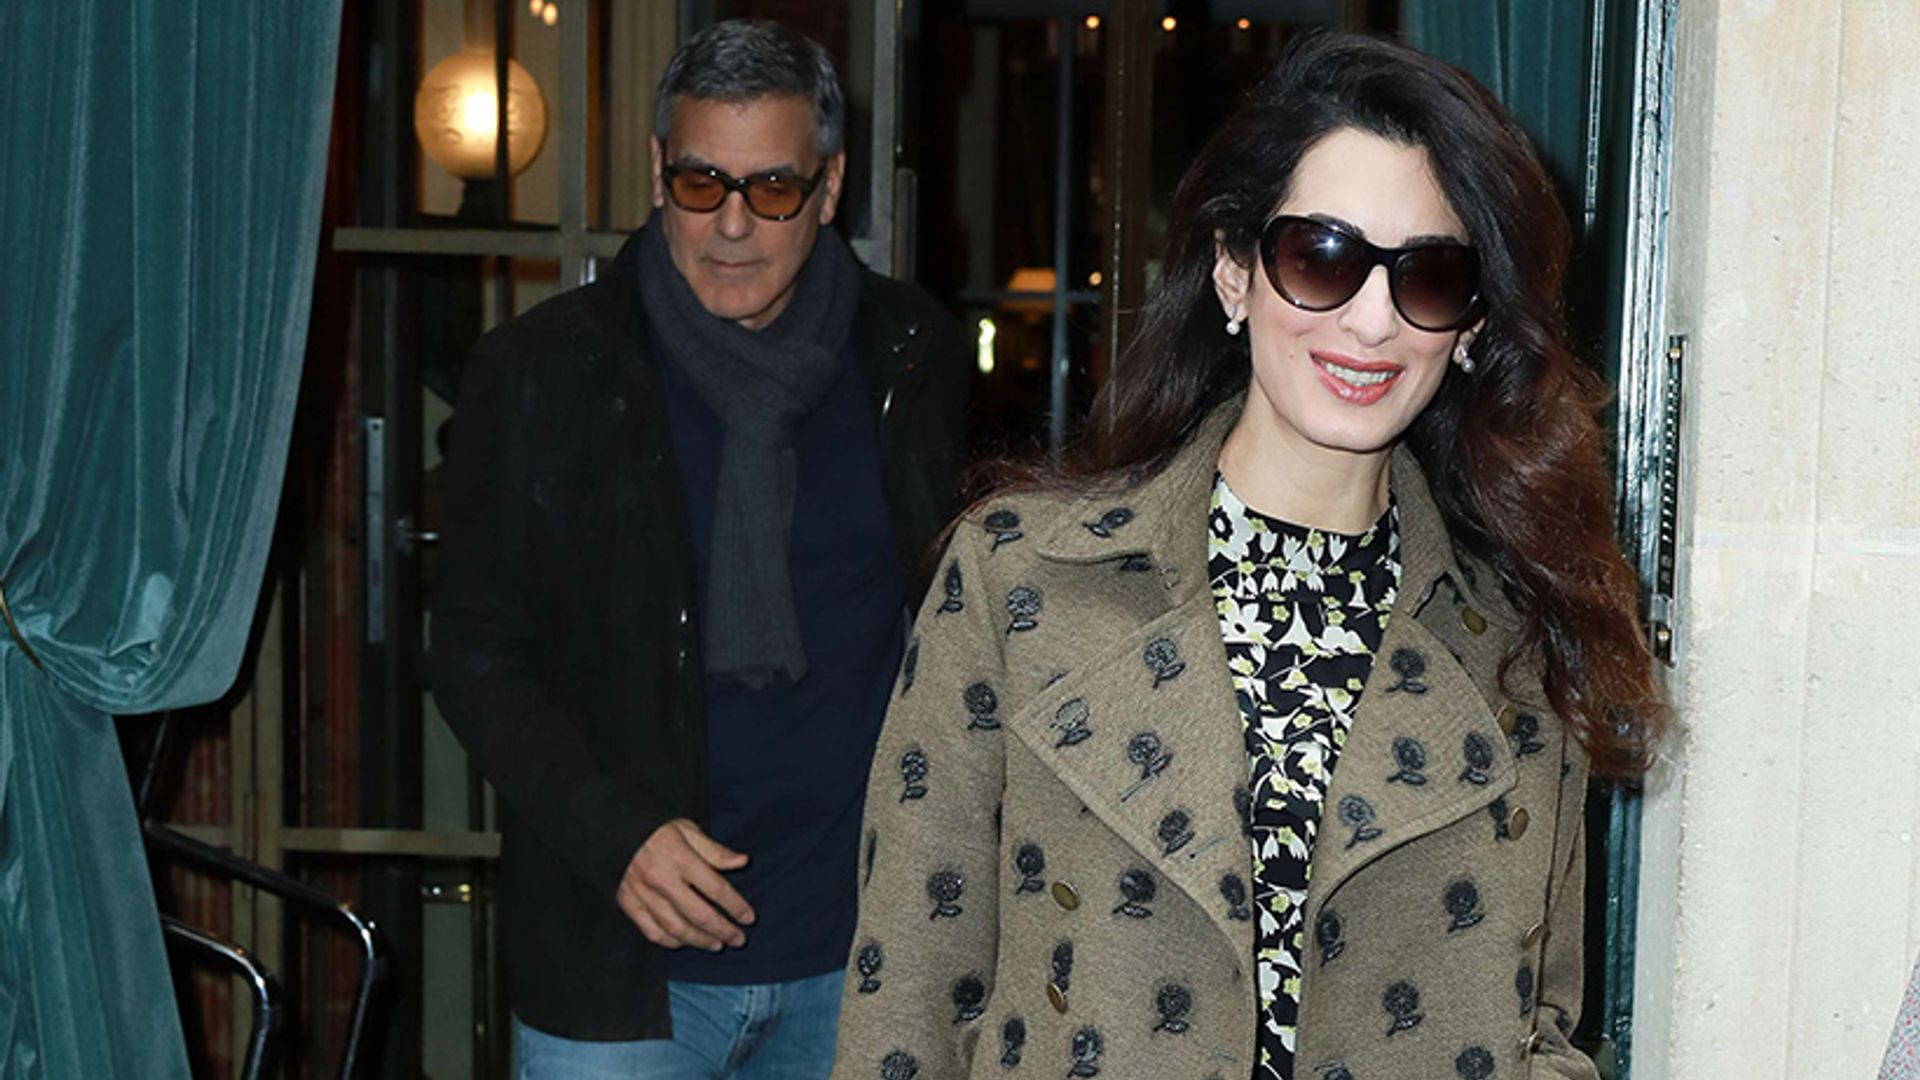 George and Amal Clooney take well-deserved night off parenting duty